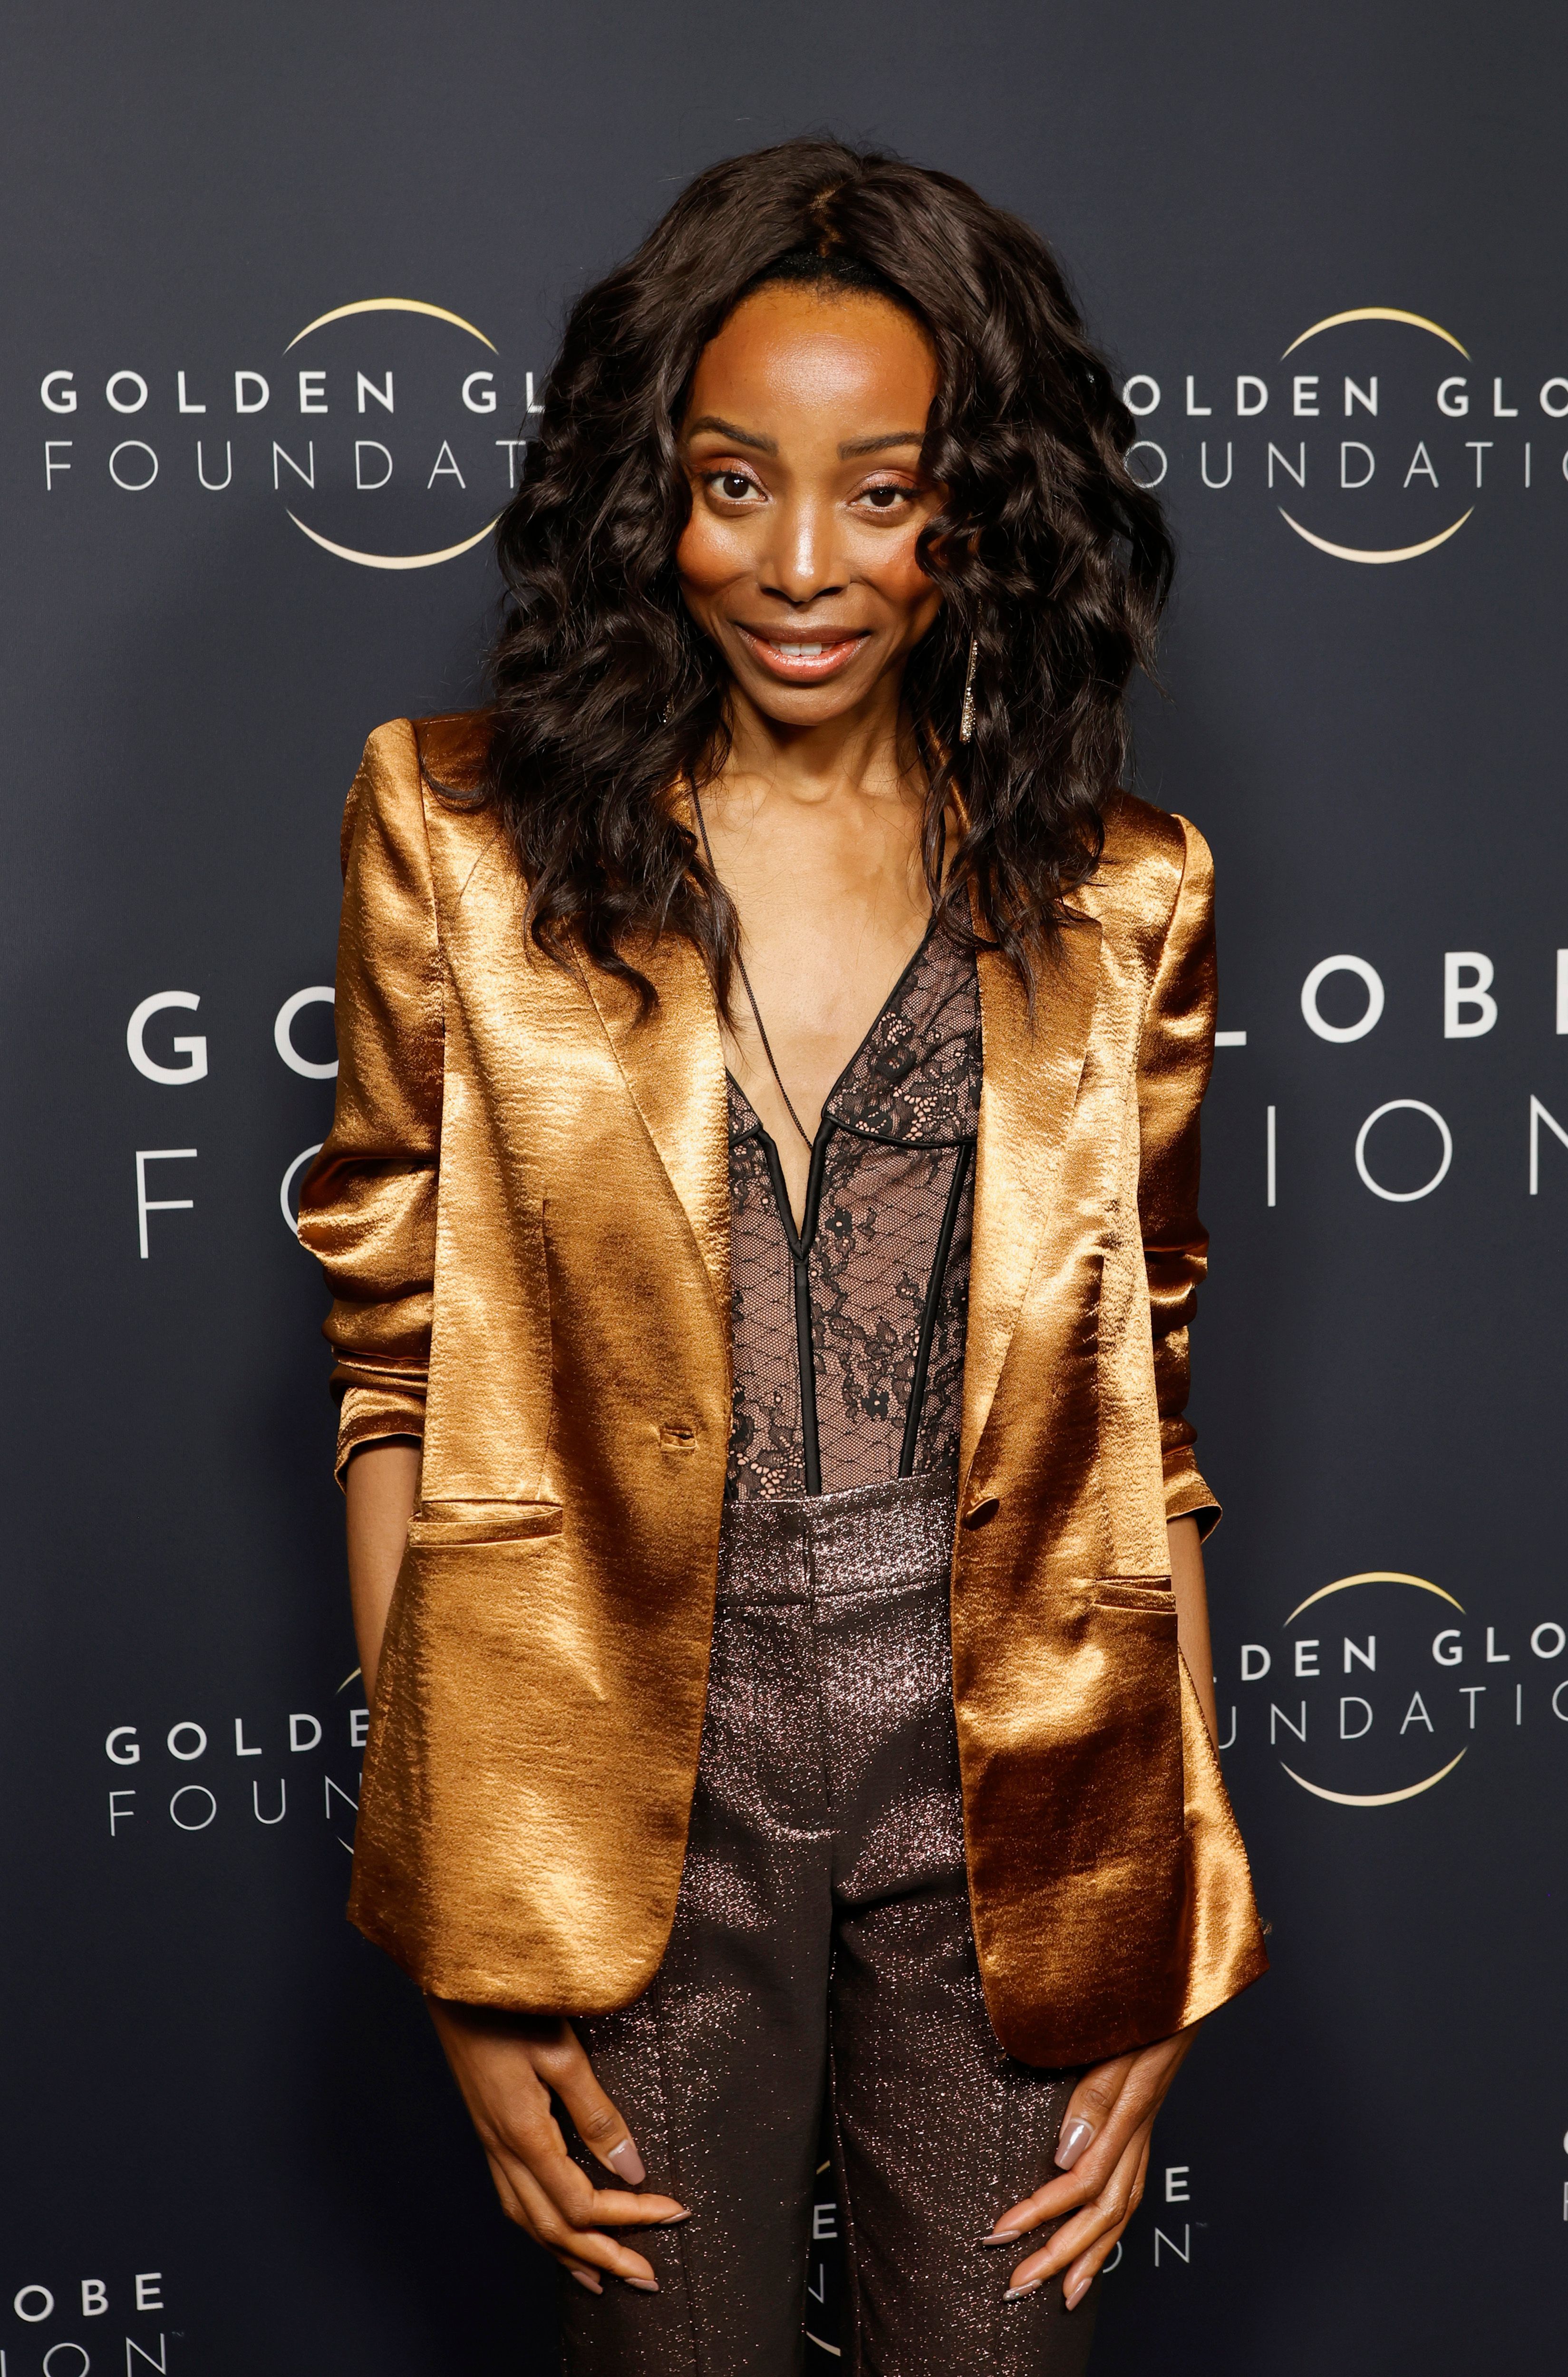 Erica Ash attends the Golden Globe Foundation Dinner at The Beverly Hilton on January 5